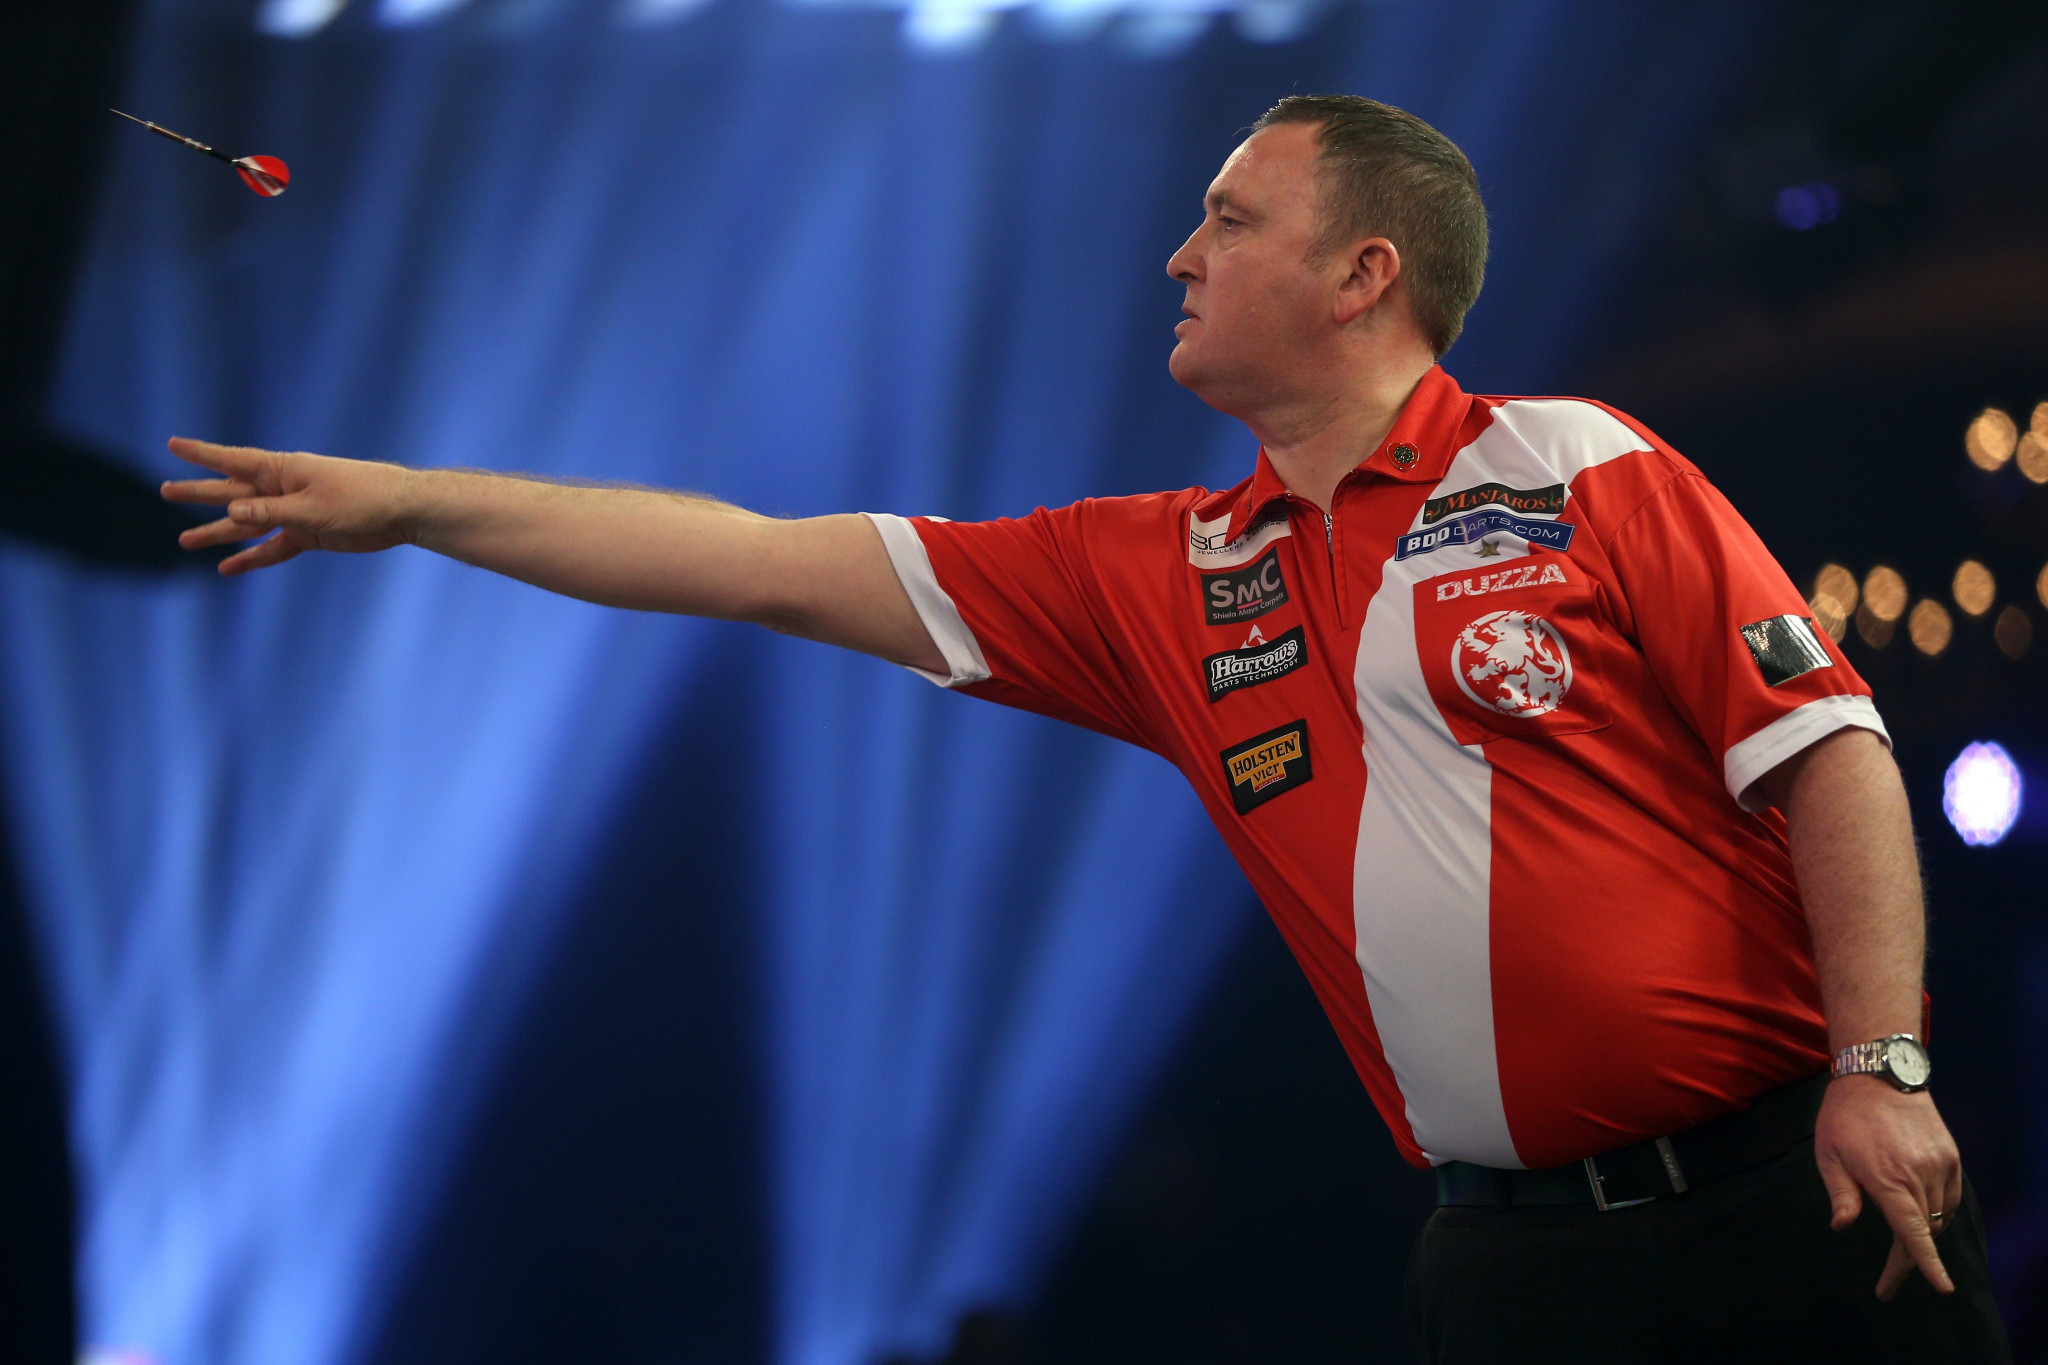 Glen Durrant reached the second round of the British Darts Organisation World Championship ©Getty Images